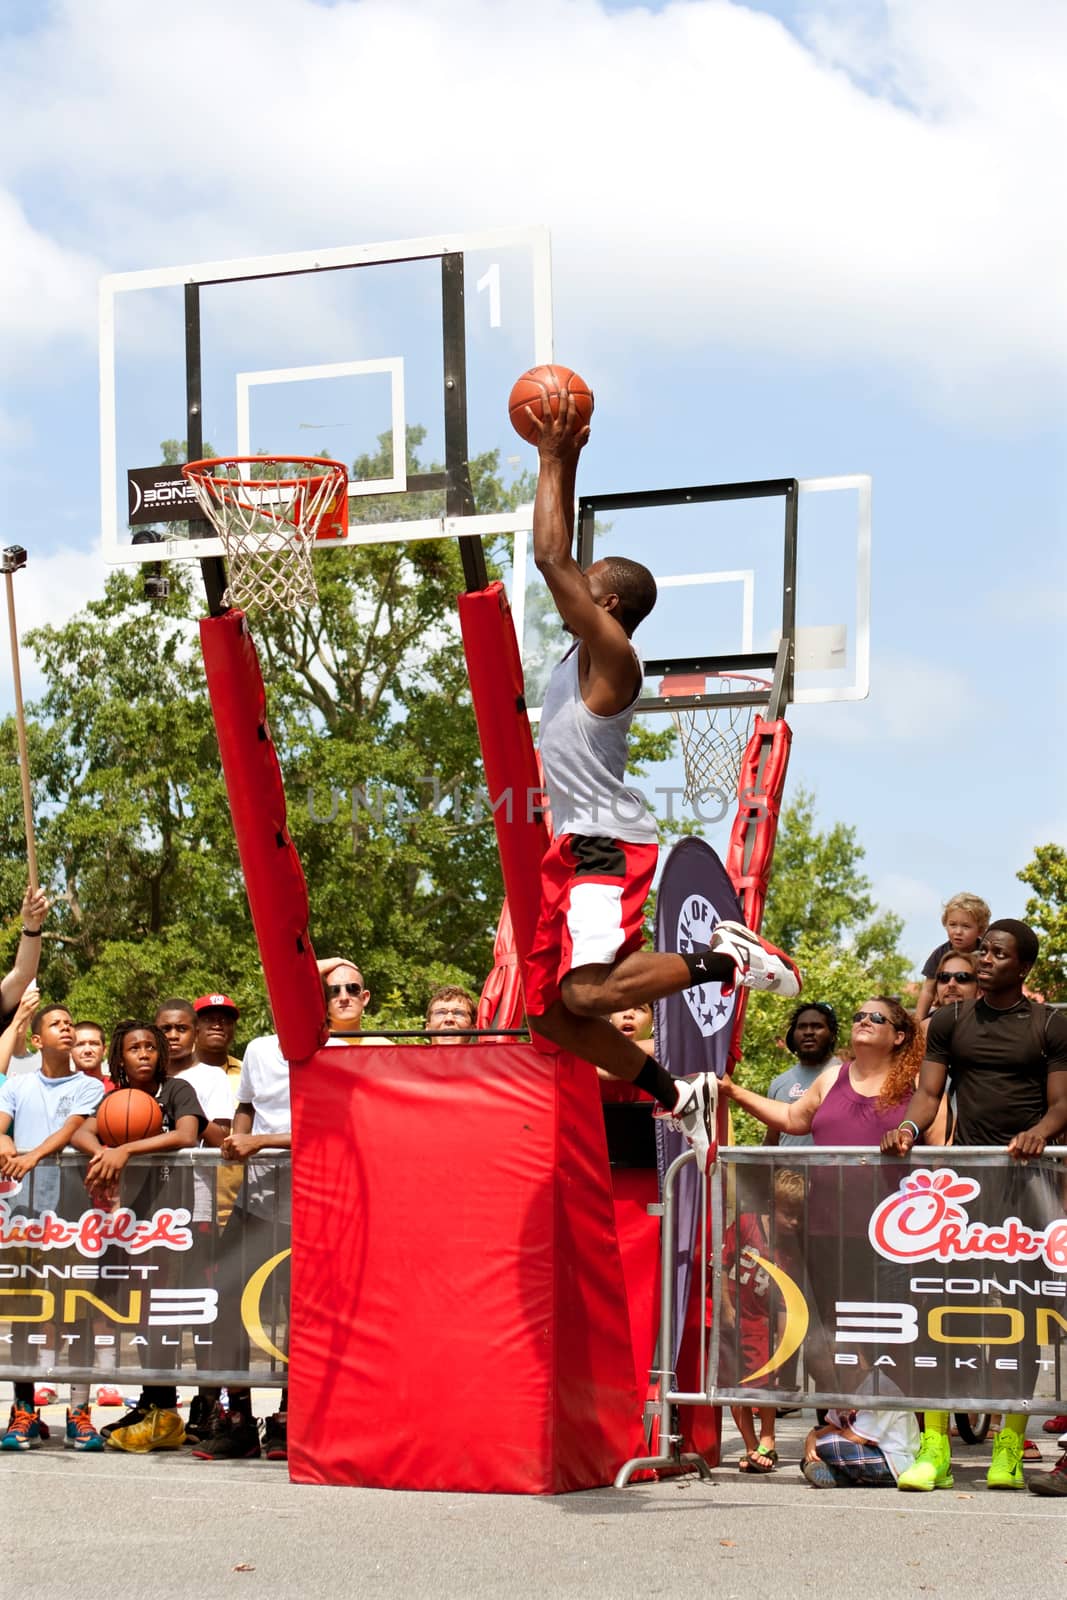 Young Man Jumps High In Outdoor Basketball Slam Dunk Contest by BluIz60